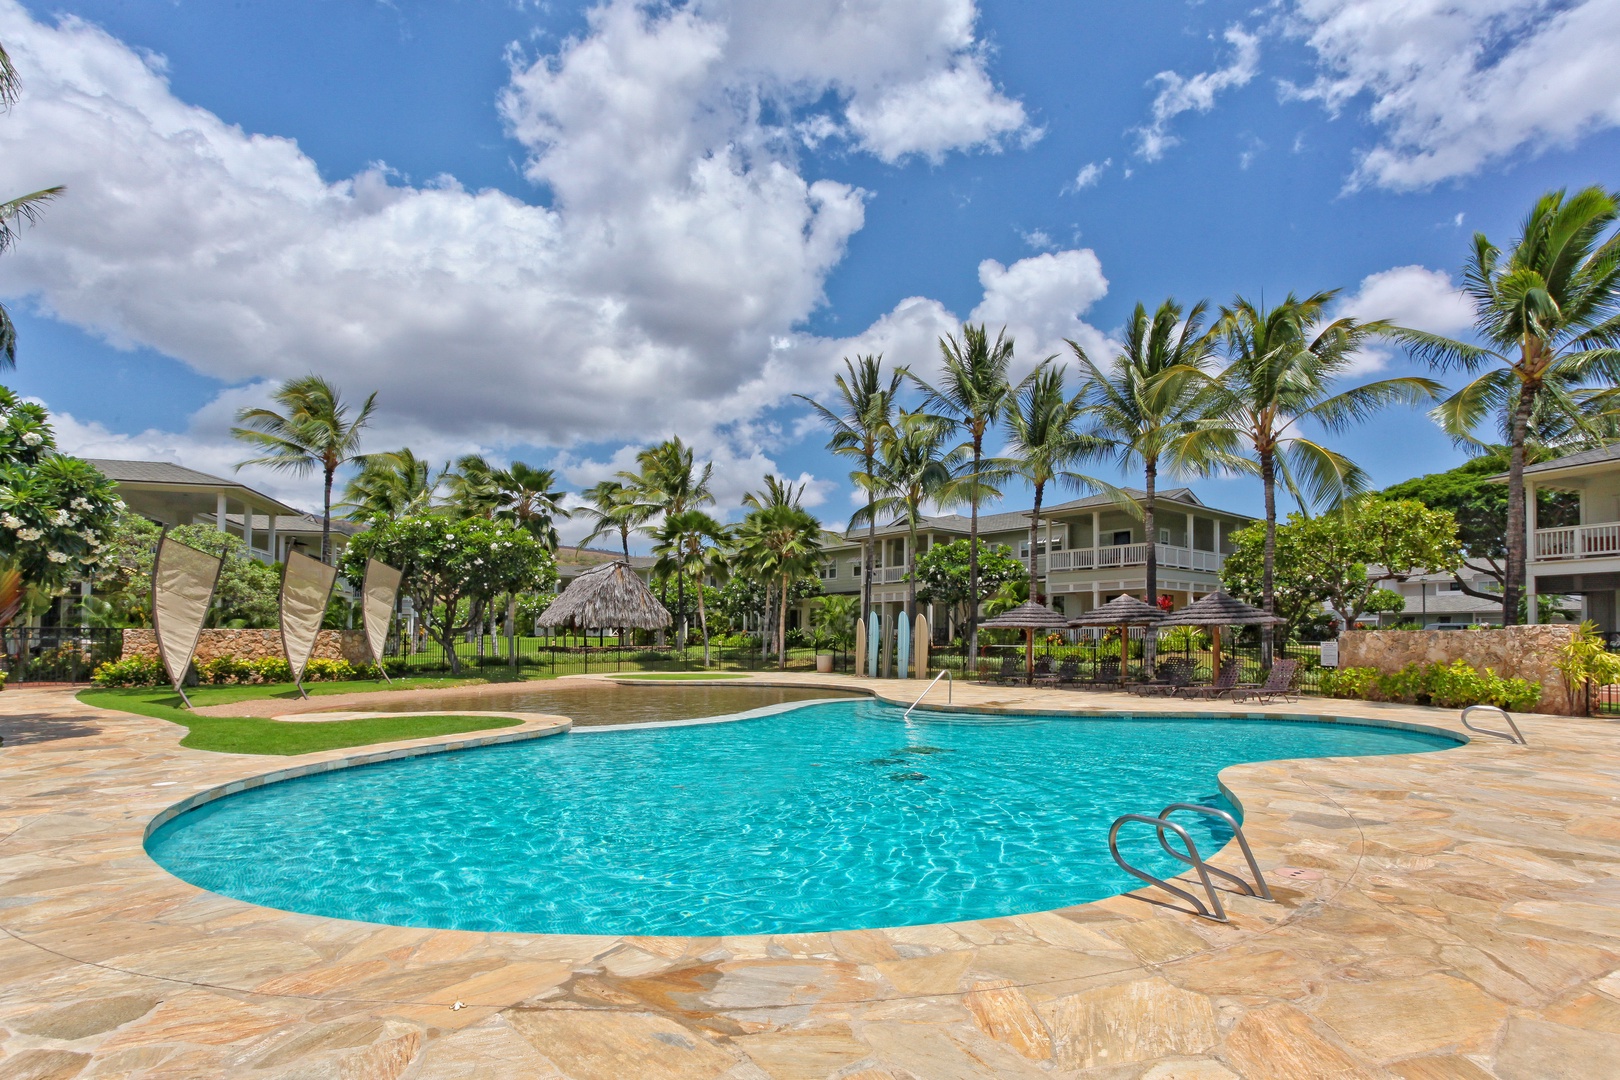 Kapolei Vacation Rentals, Coconut Plantation 1194-3 - Relax with your favorite book at the Coconut Plantation pool.